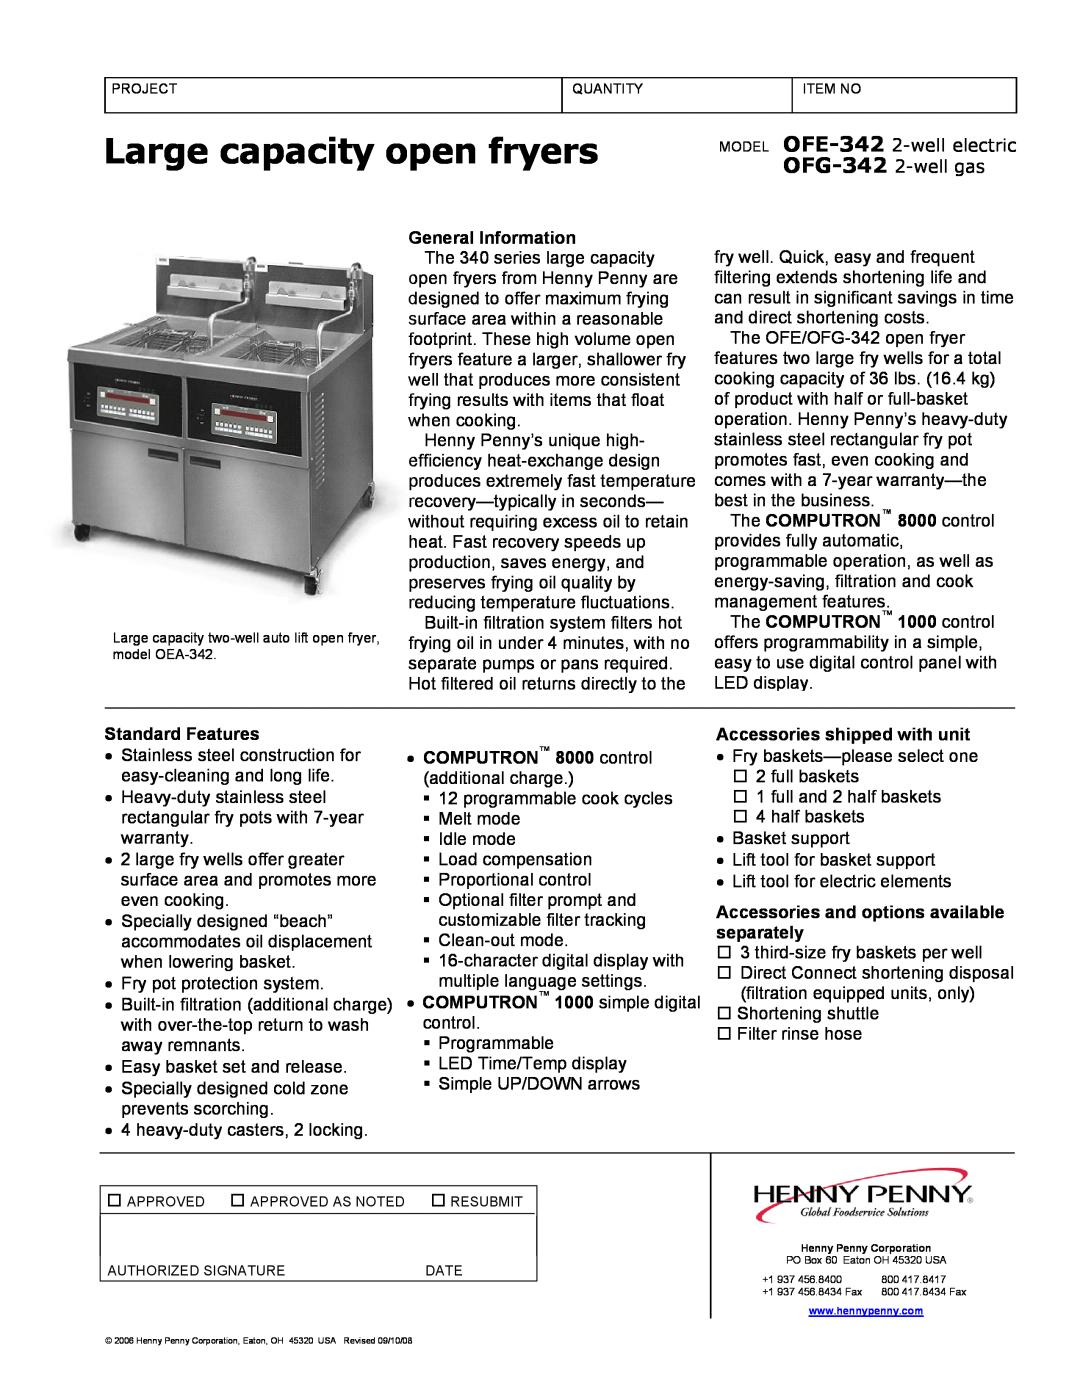 Henny Penny OFG-342, OFE-342 warranty Large capacity open fryers, General Information, Standard Features 